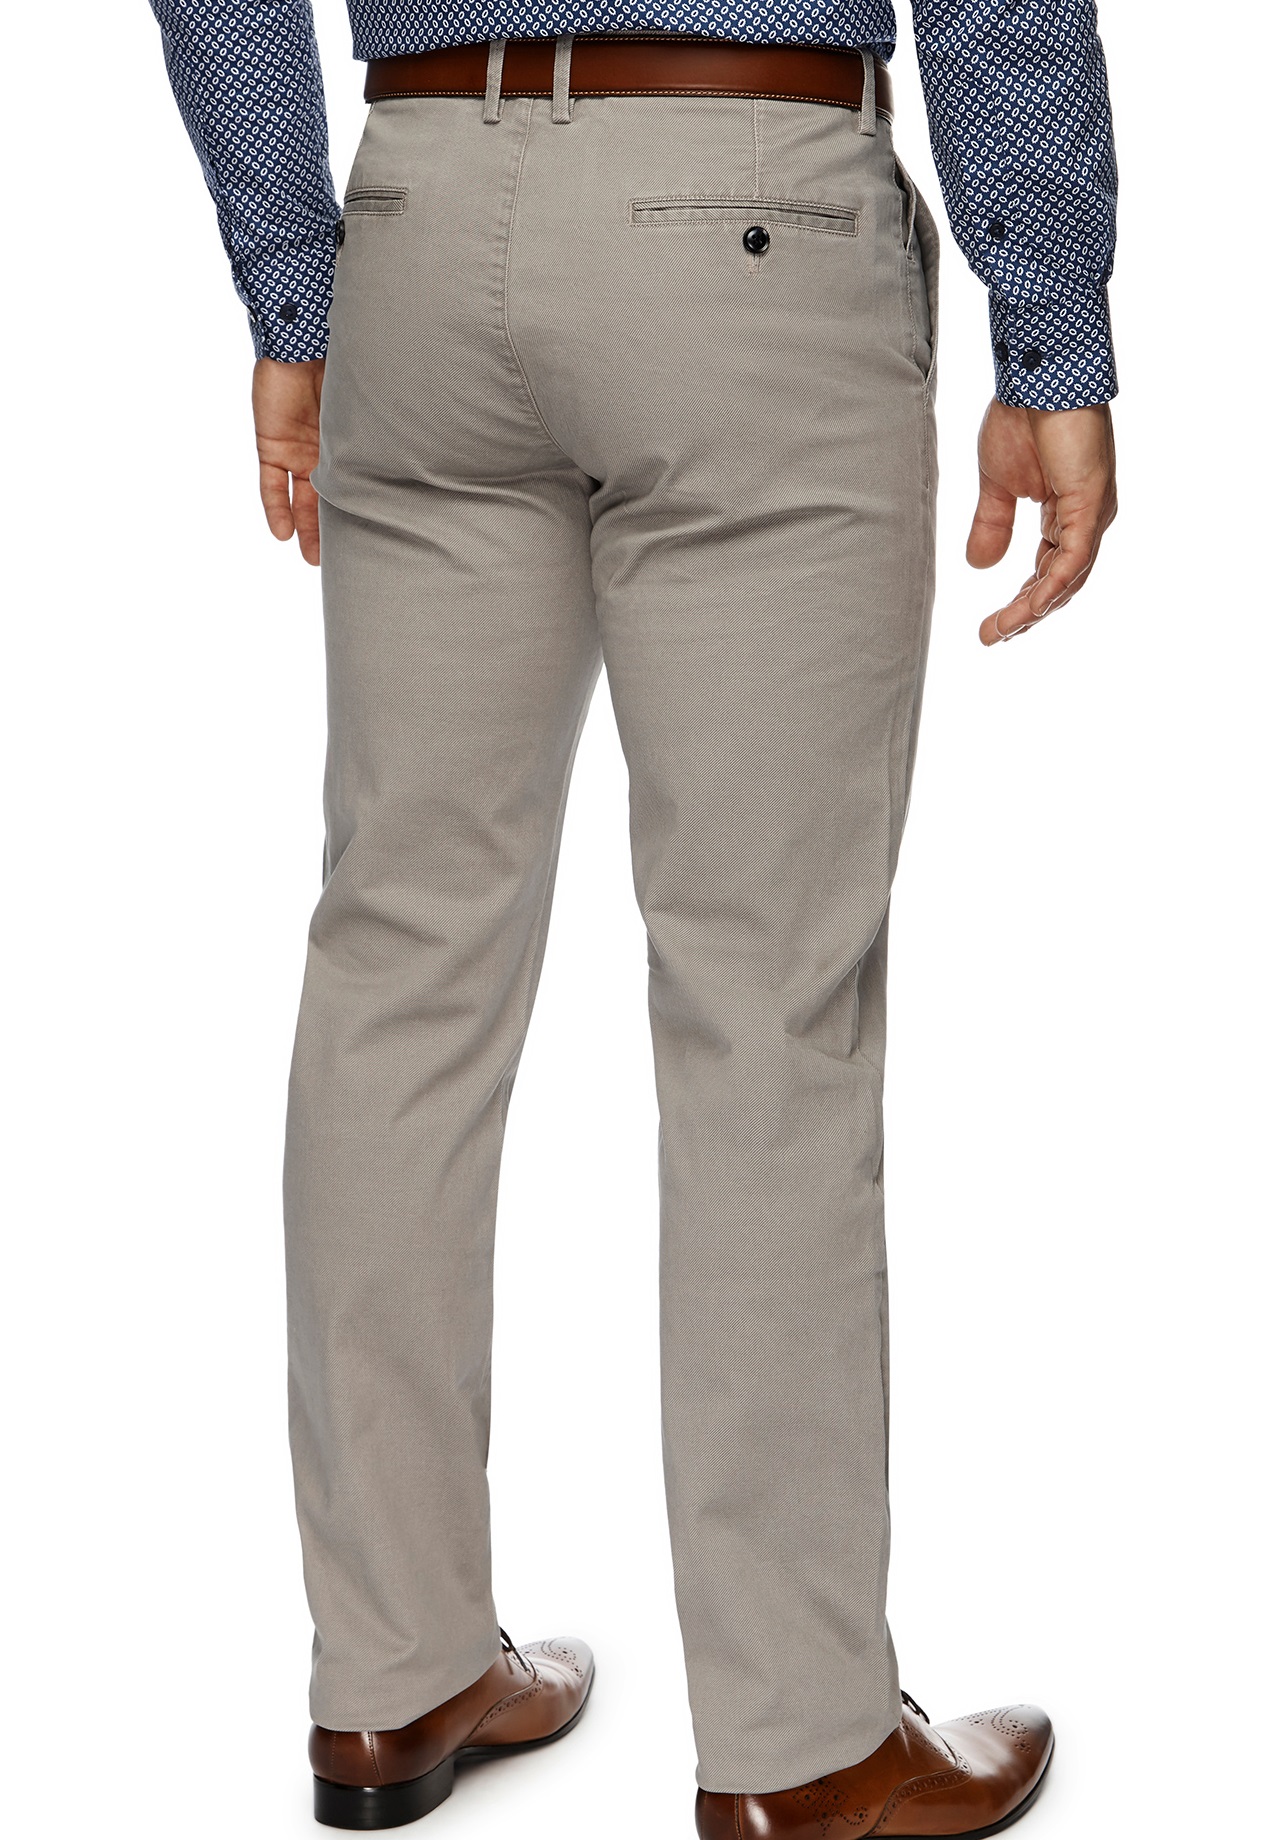 City Club Mens Chino Pant Cotton Stretch Buy Online Free Delivery